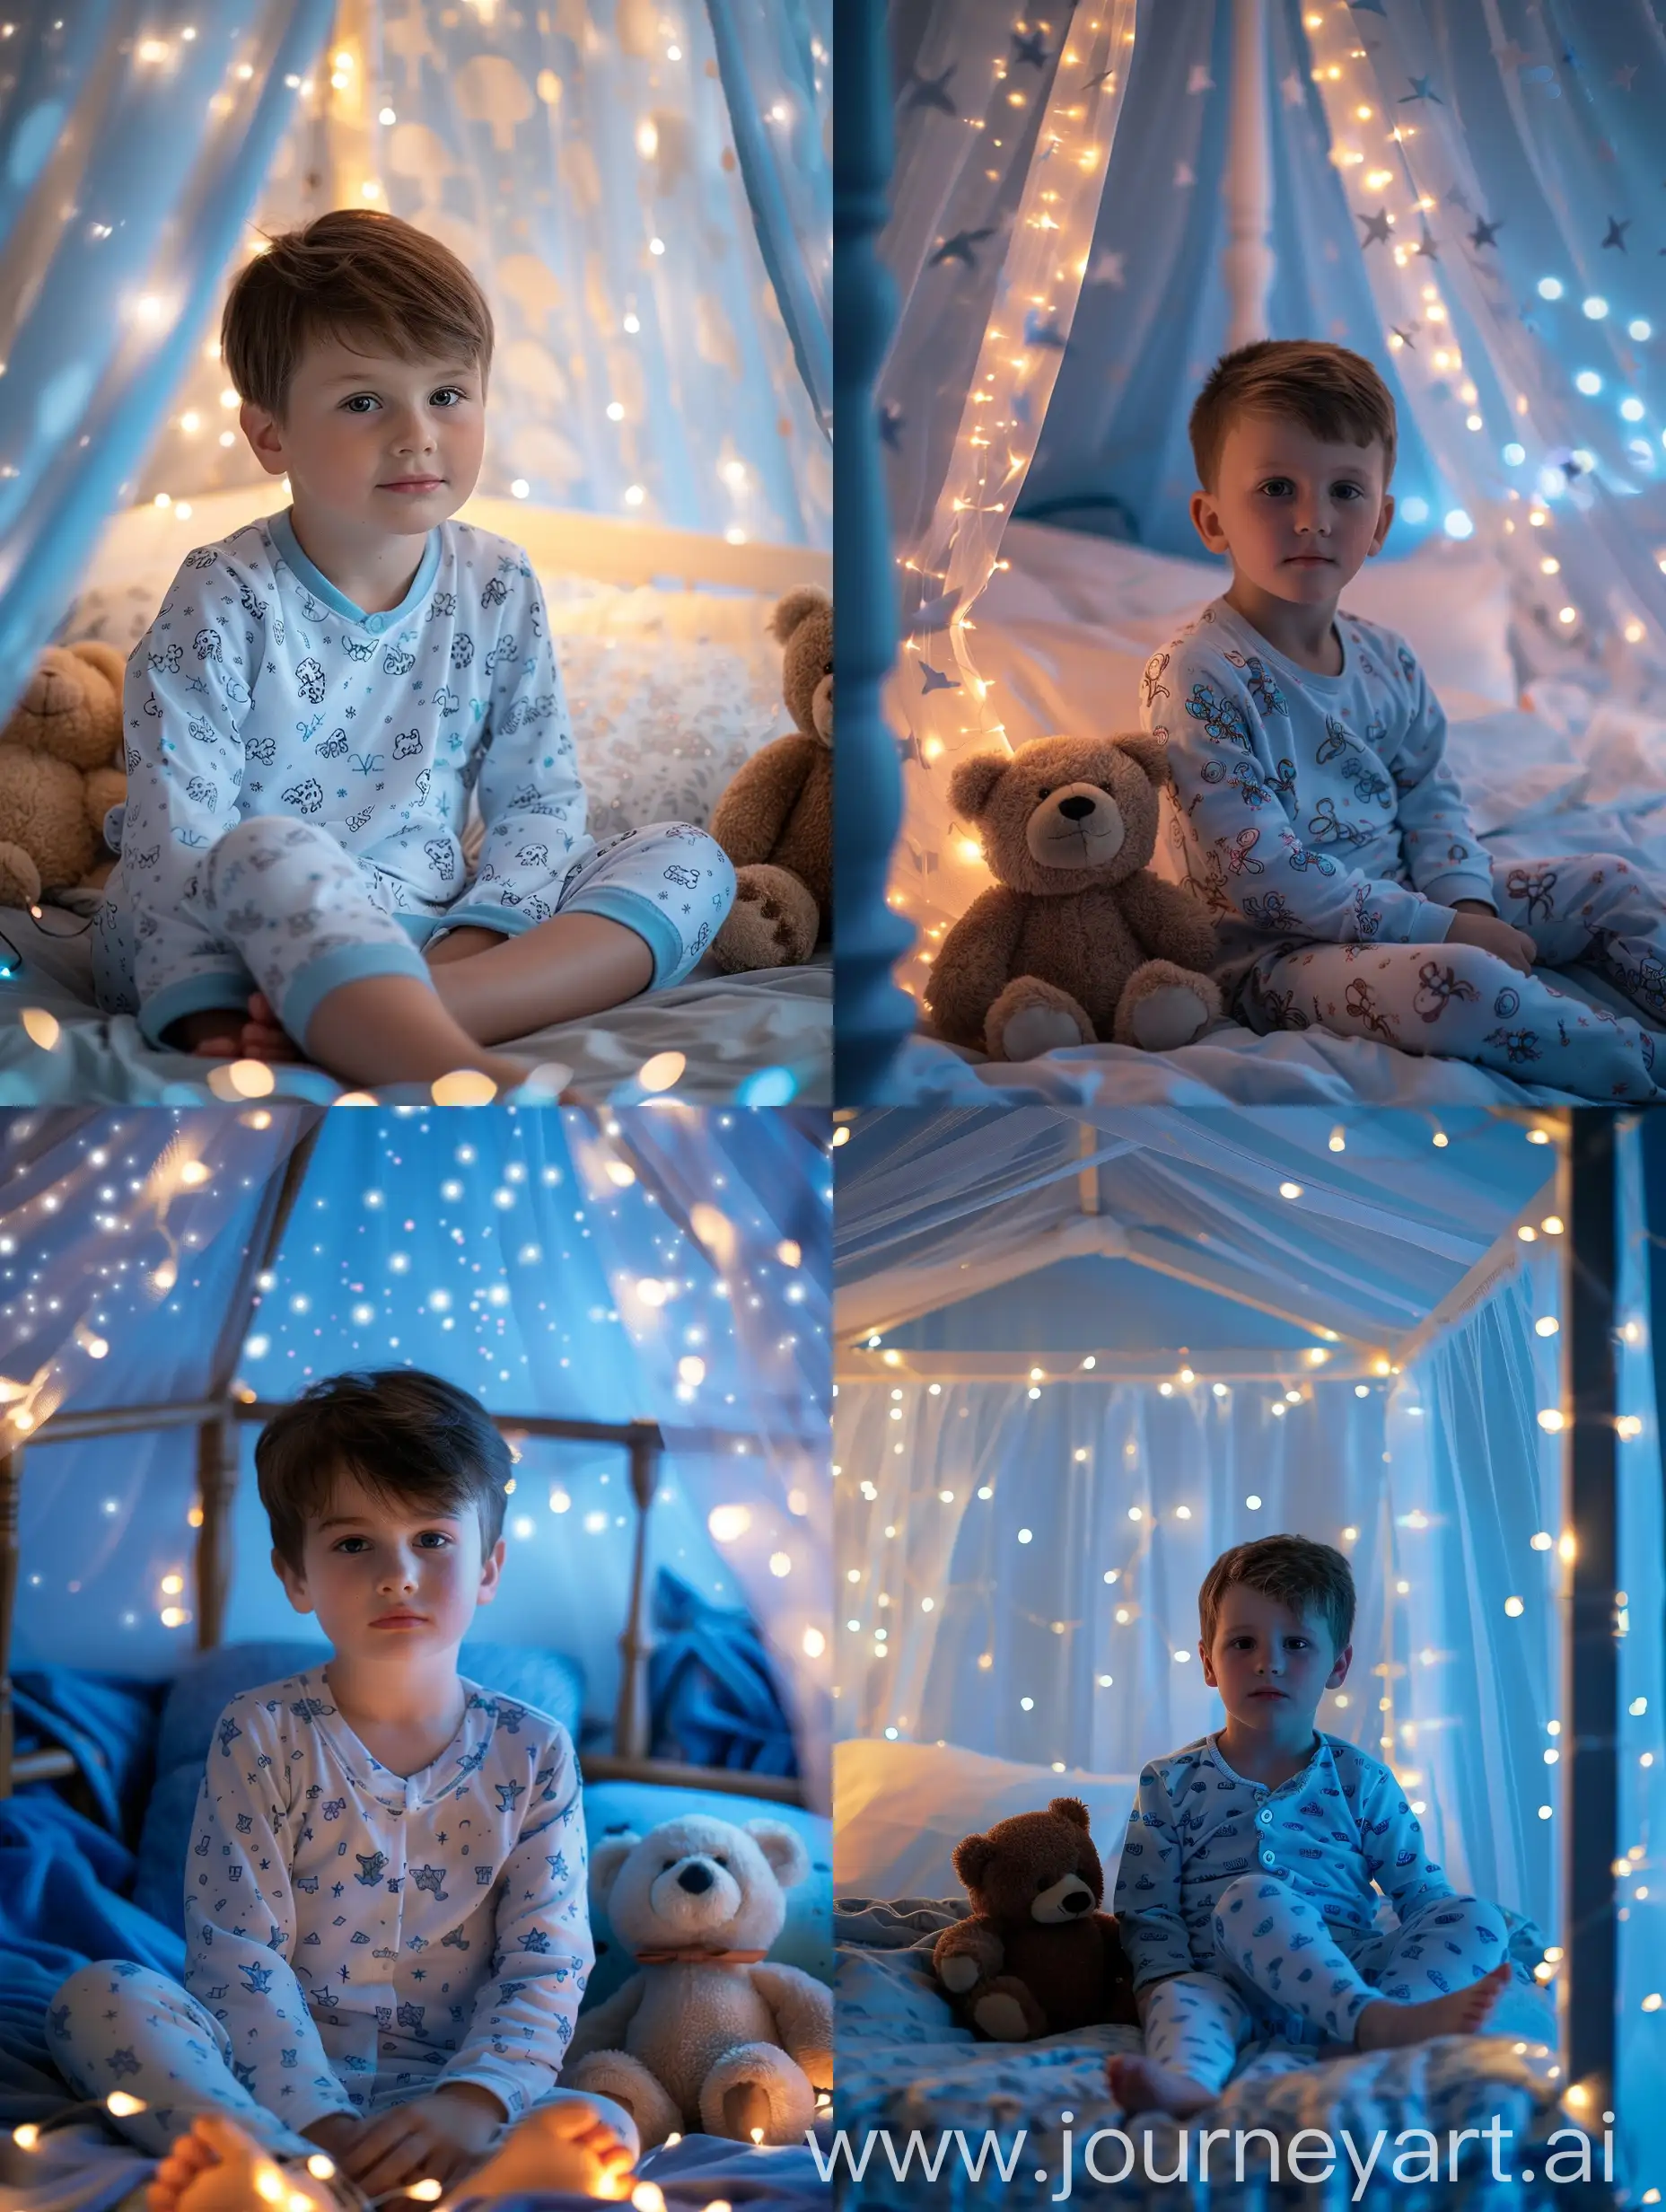 A little boy of seven years old in pajamas sits on a four-poster bed, the canopy glows with lights, next to a teddy bear, close-up, realistic photo, hyperrealism, face is clearly visible, looks at the camera, photo in blue and white tones, close-up photo, light photo